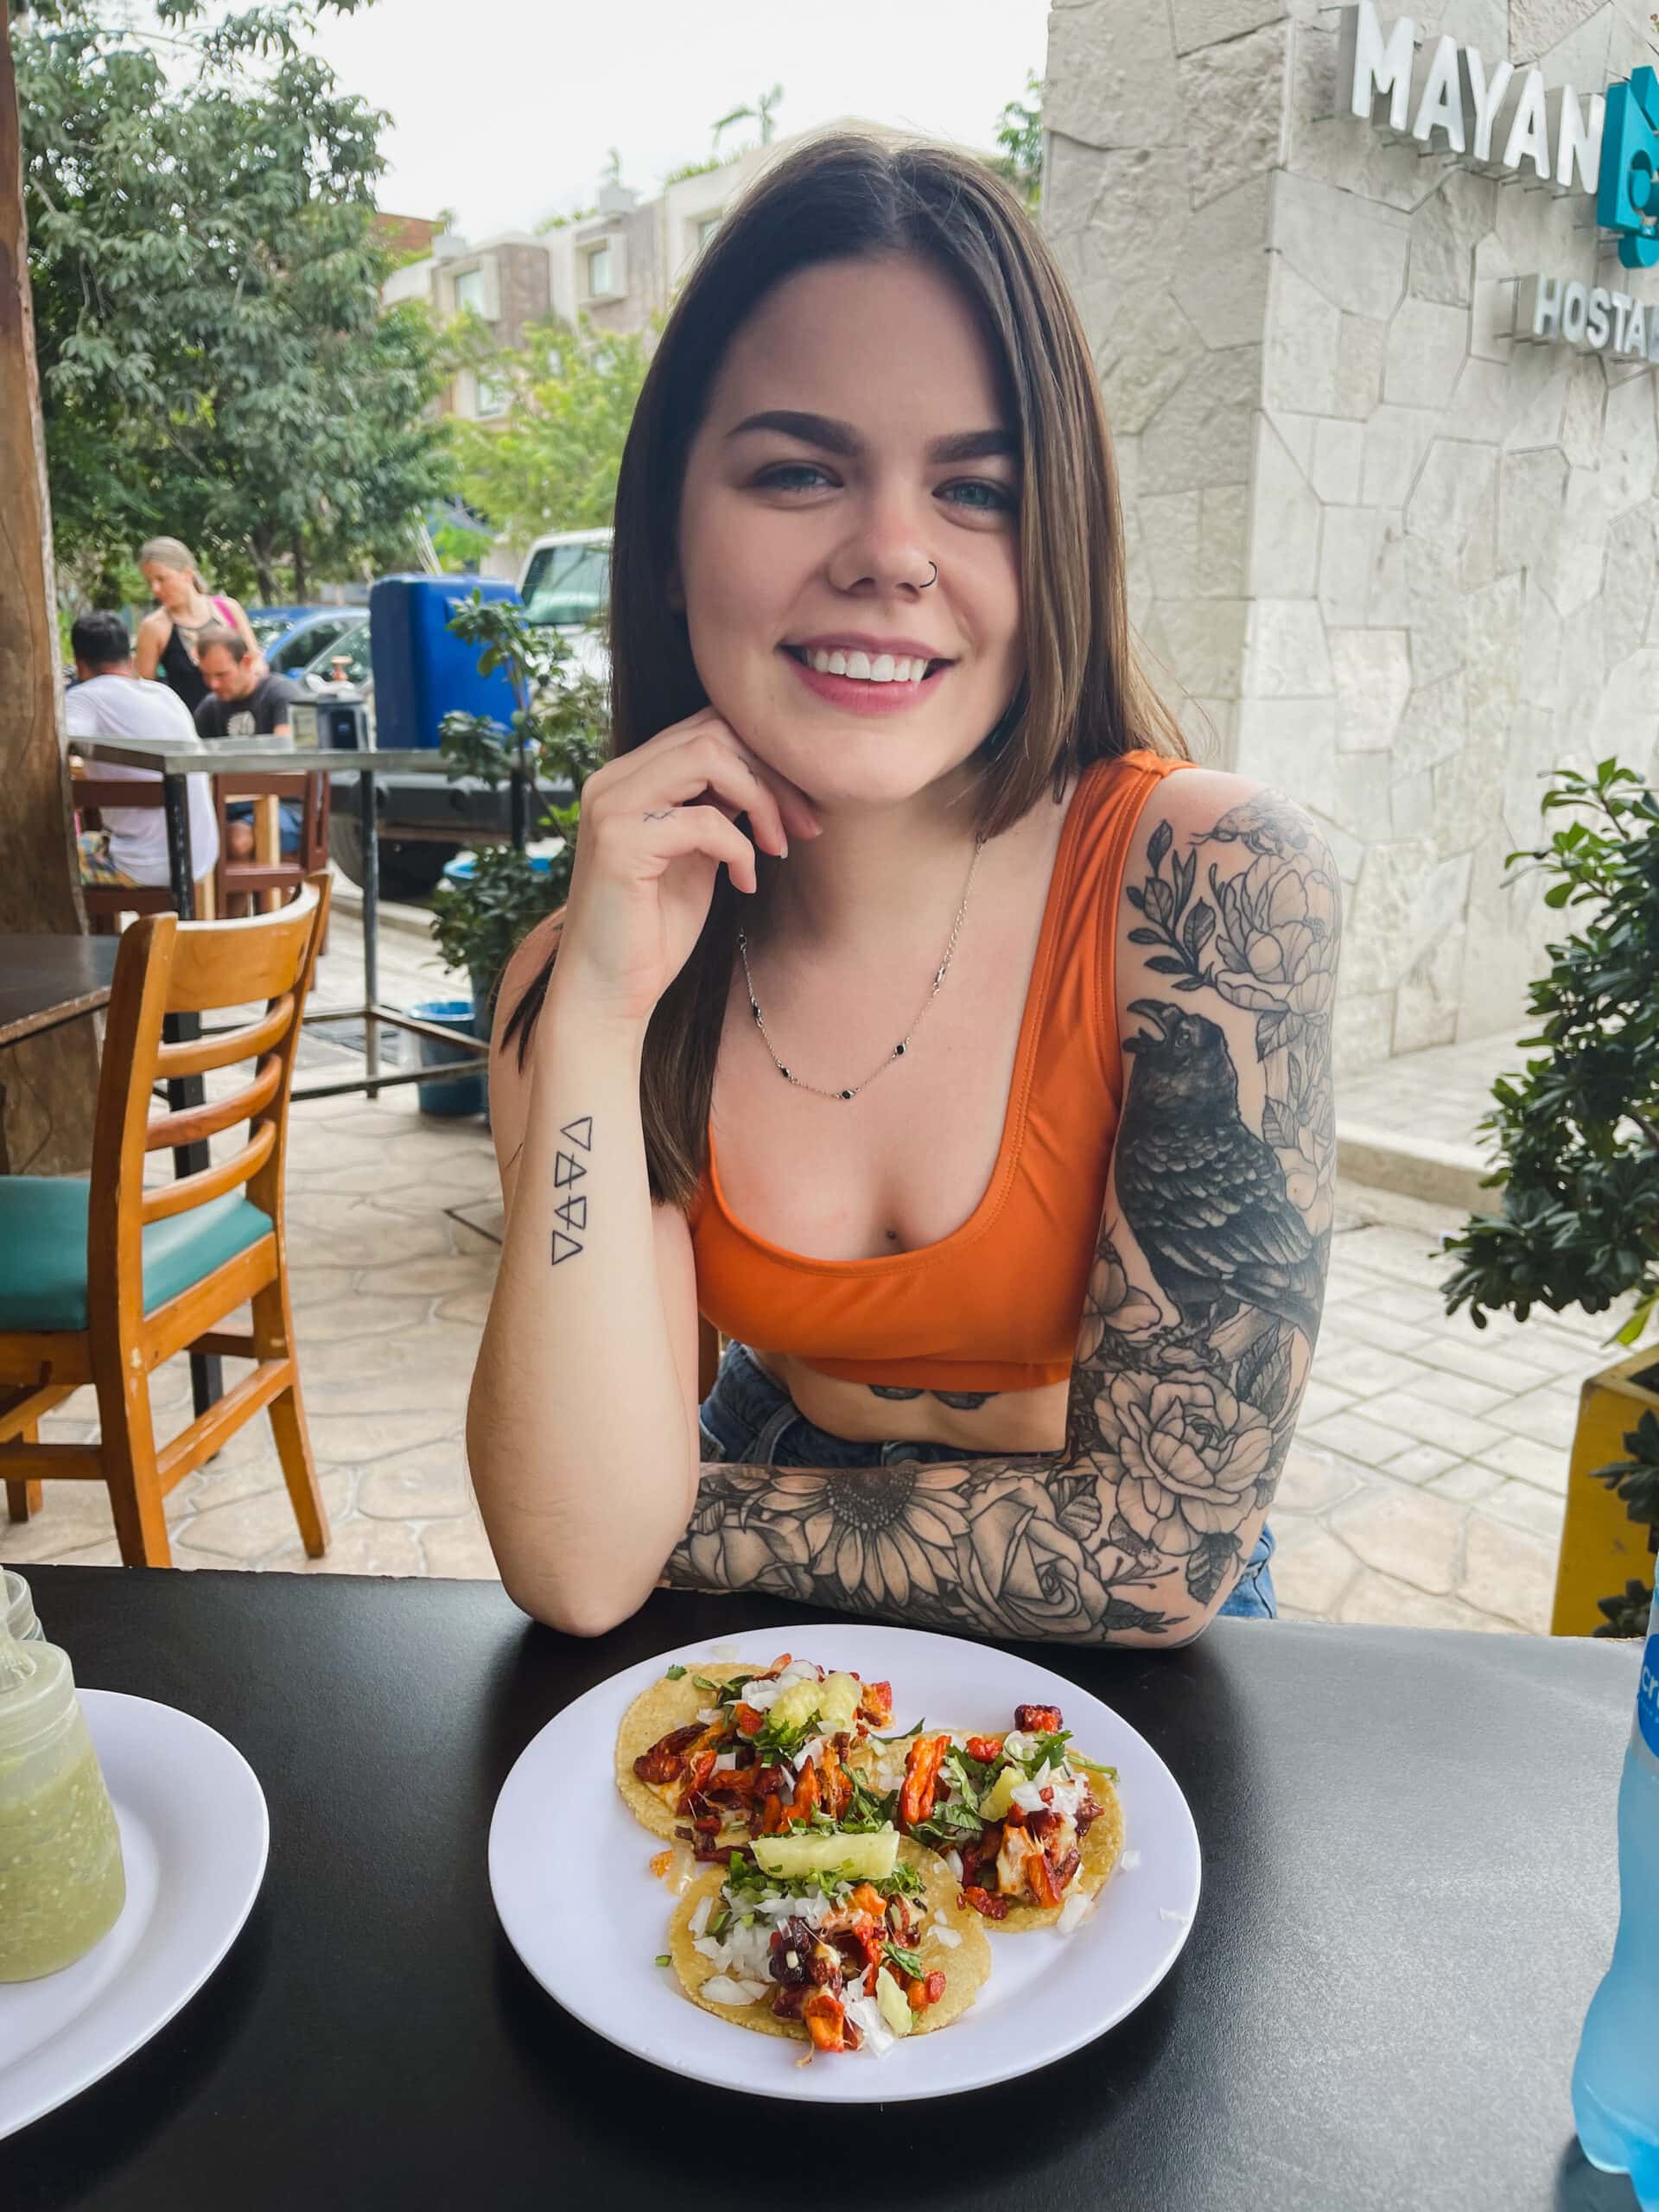 people are obsessed with travelling to try new food from different places - eating tacos in mexico